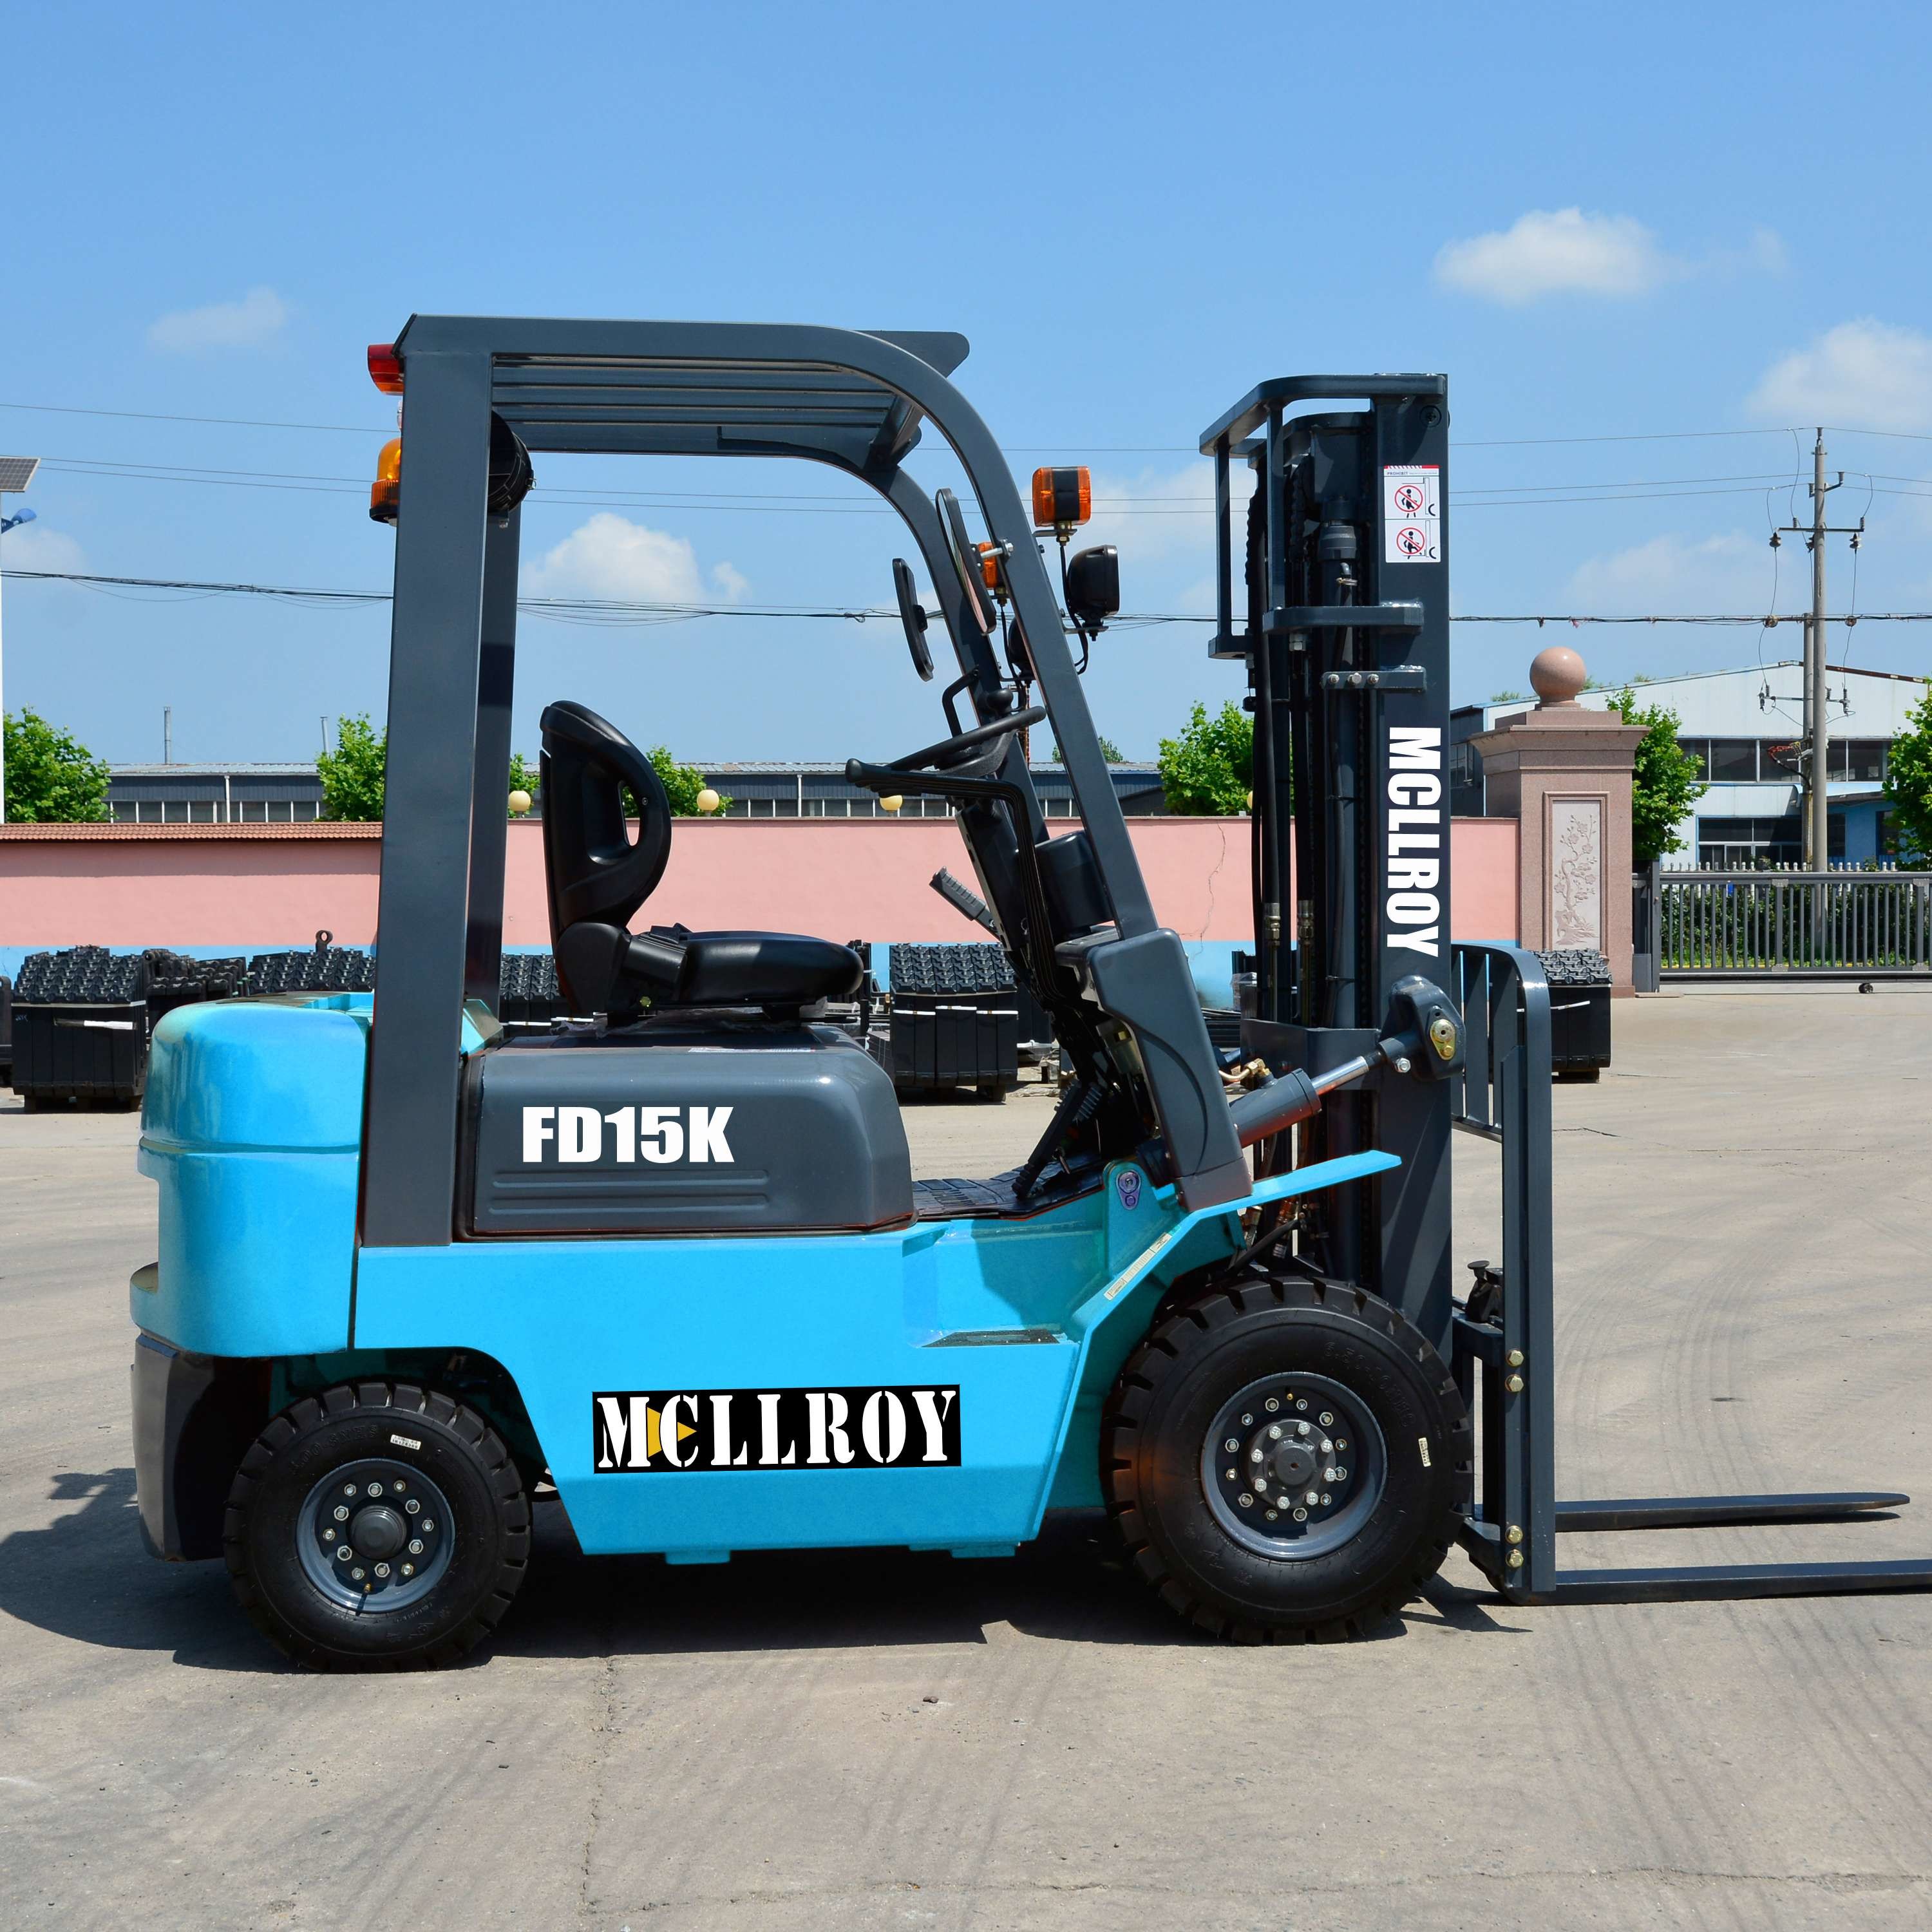 12.3KN Traction Force Diesel Powered Forklift FD15 With 12V 80Ah Battery